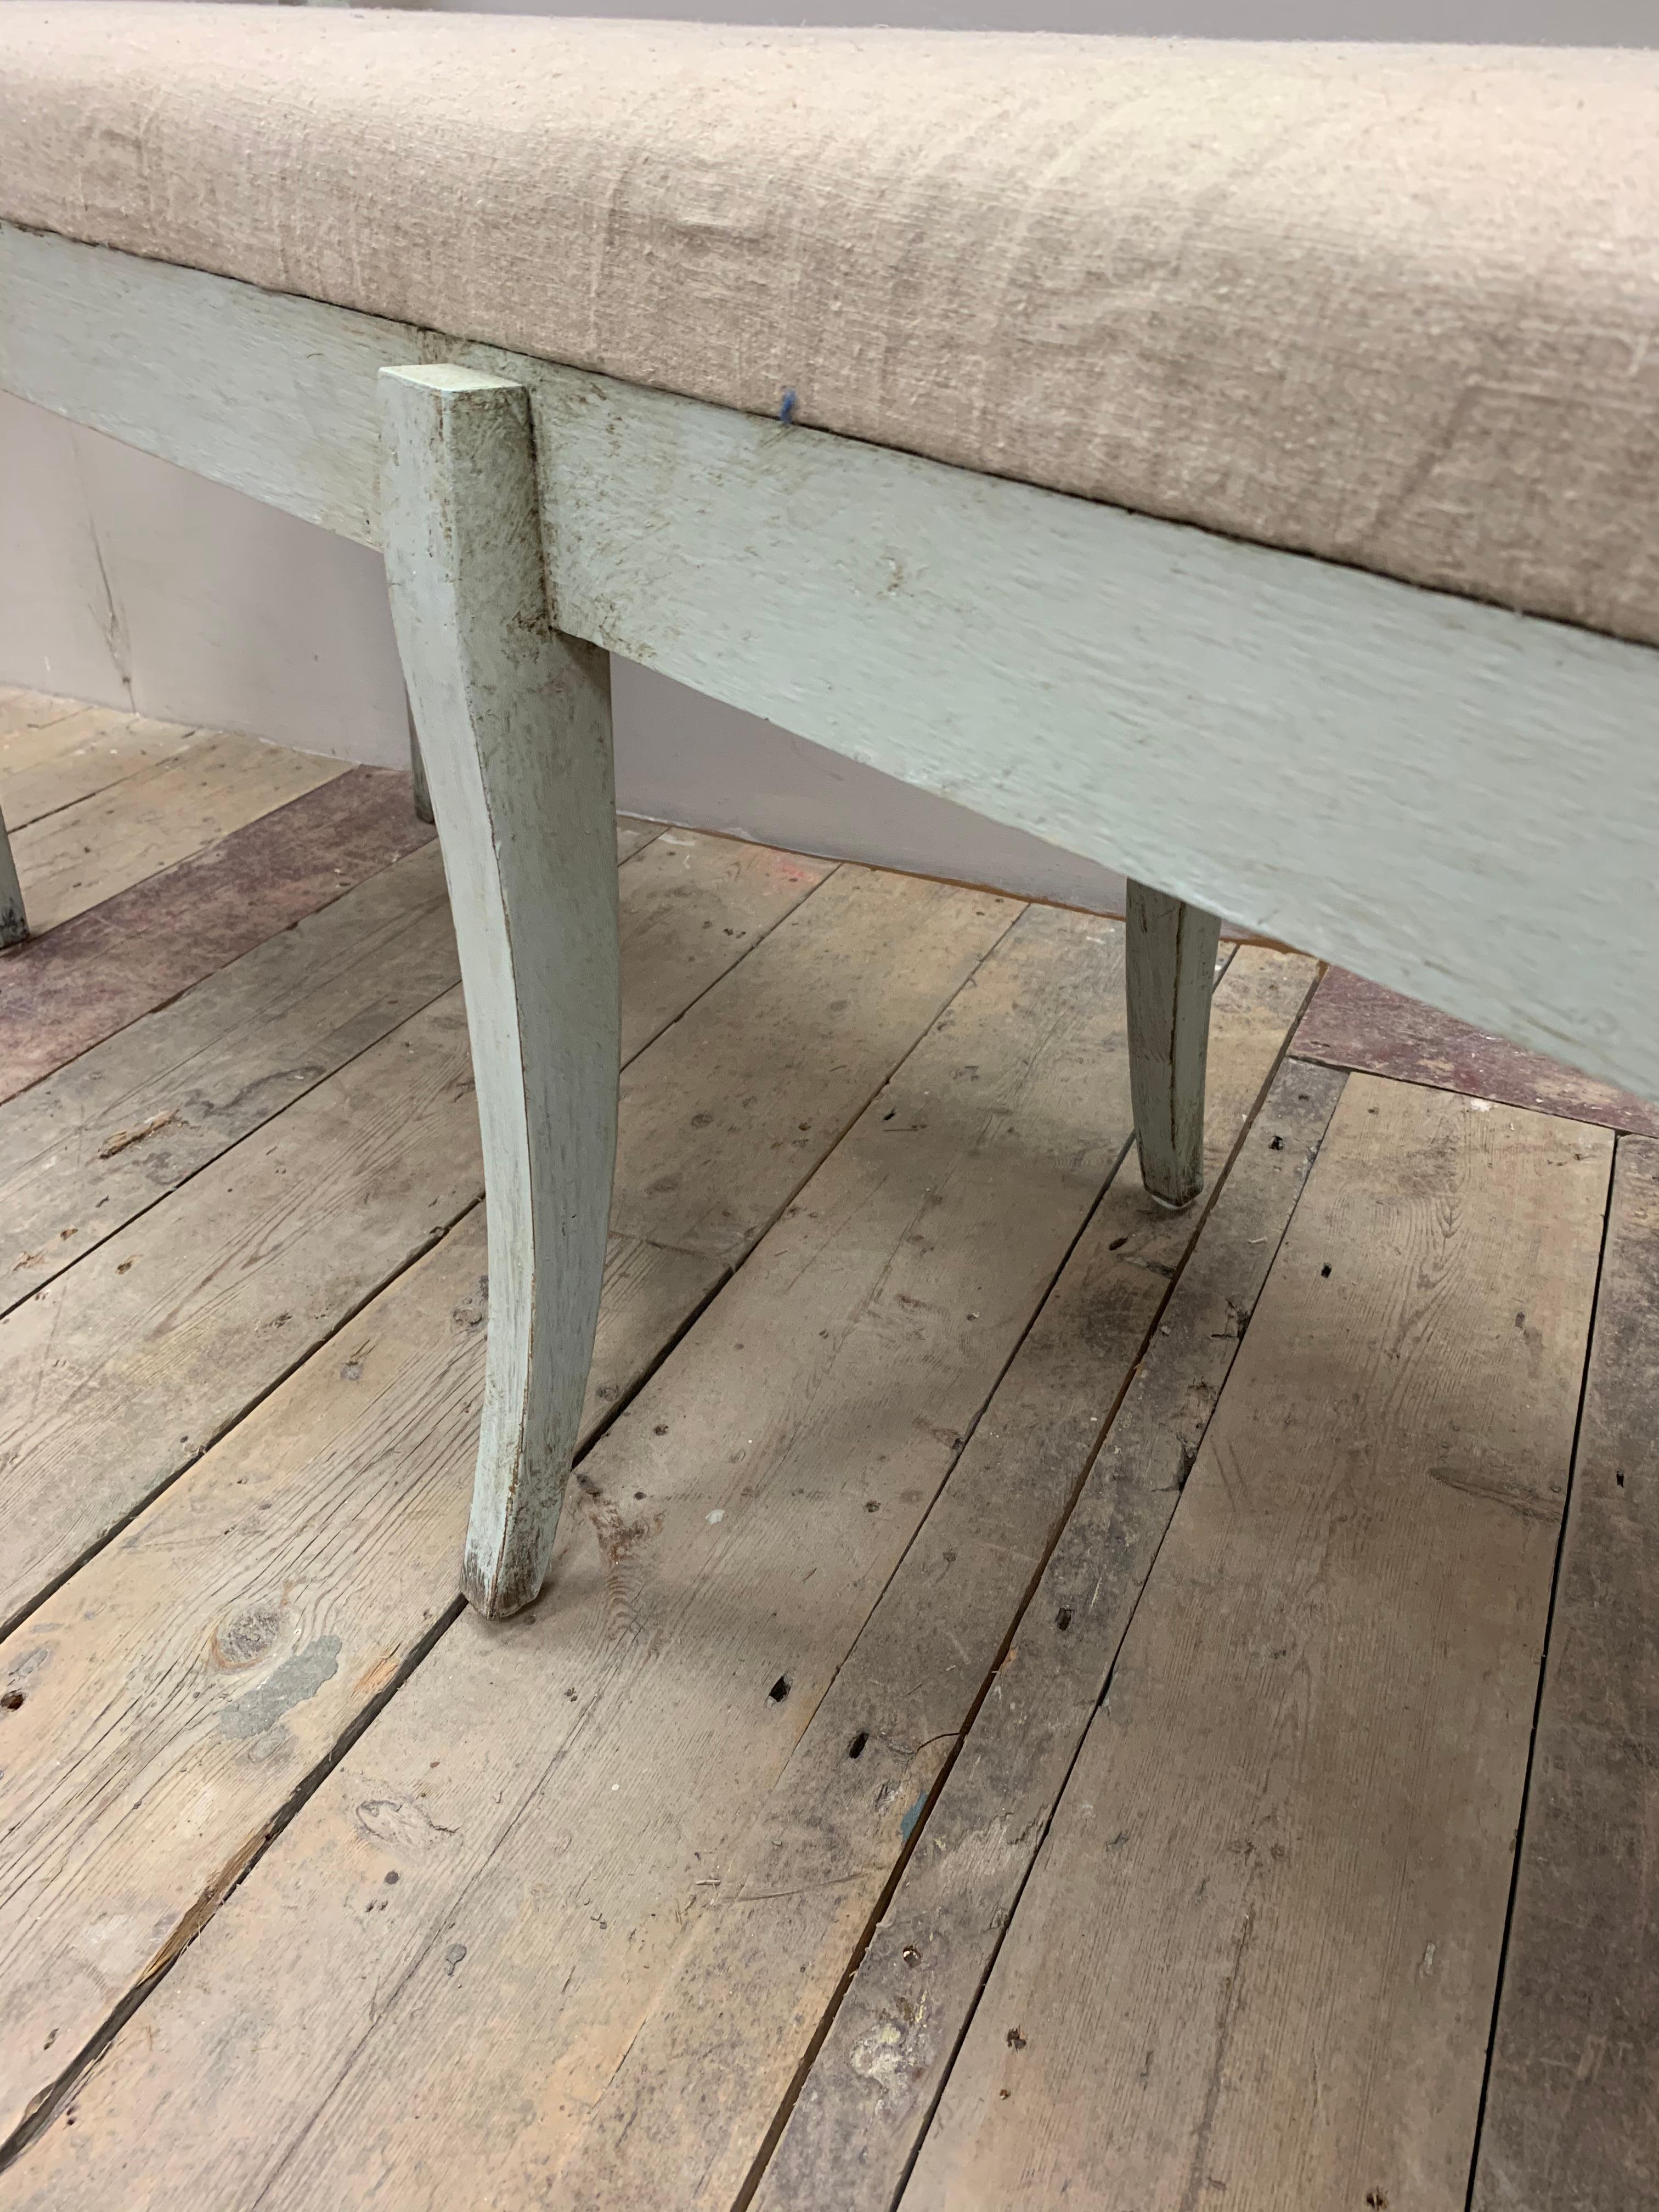 Country Circa 1900 Painted Pale Green/Blue Swedish Bench with an Upholstered Seat